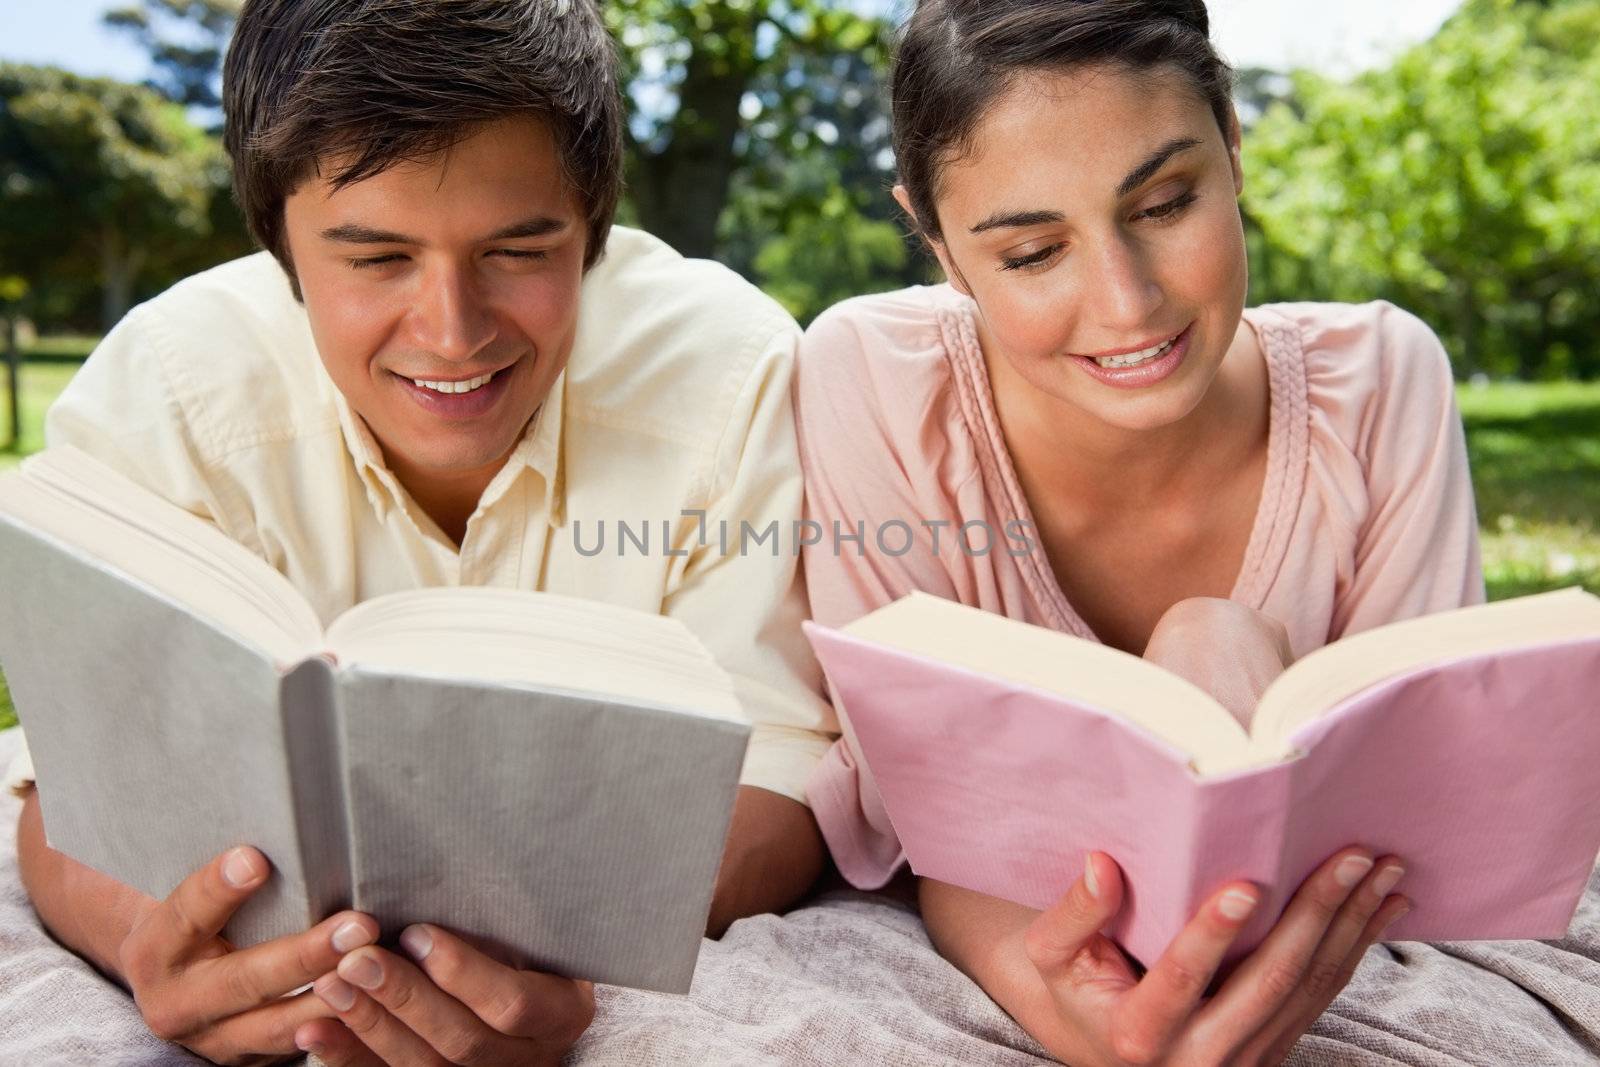 Woman and a man smiling as they are reading while lying prone on a grey blanket in the grass